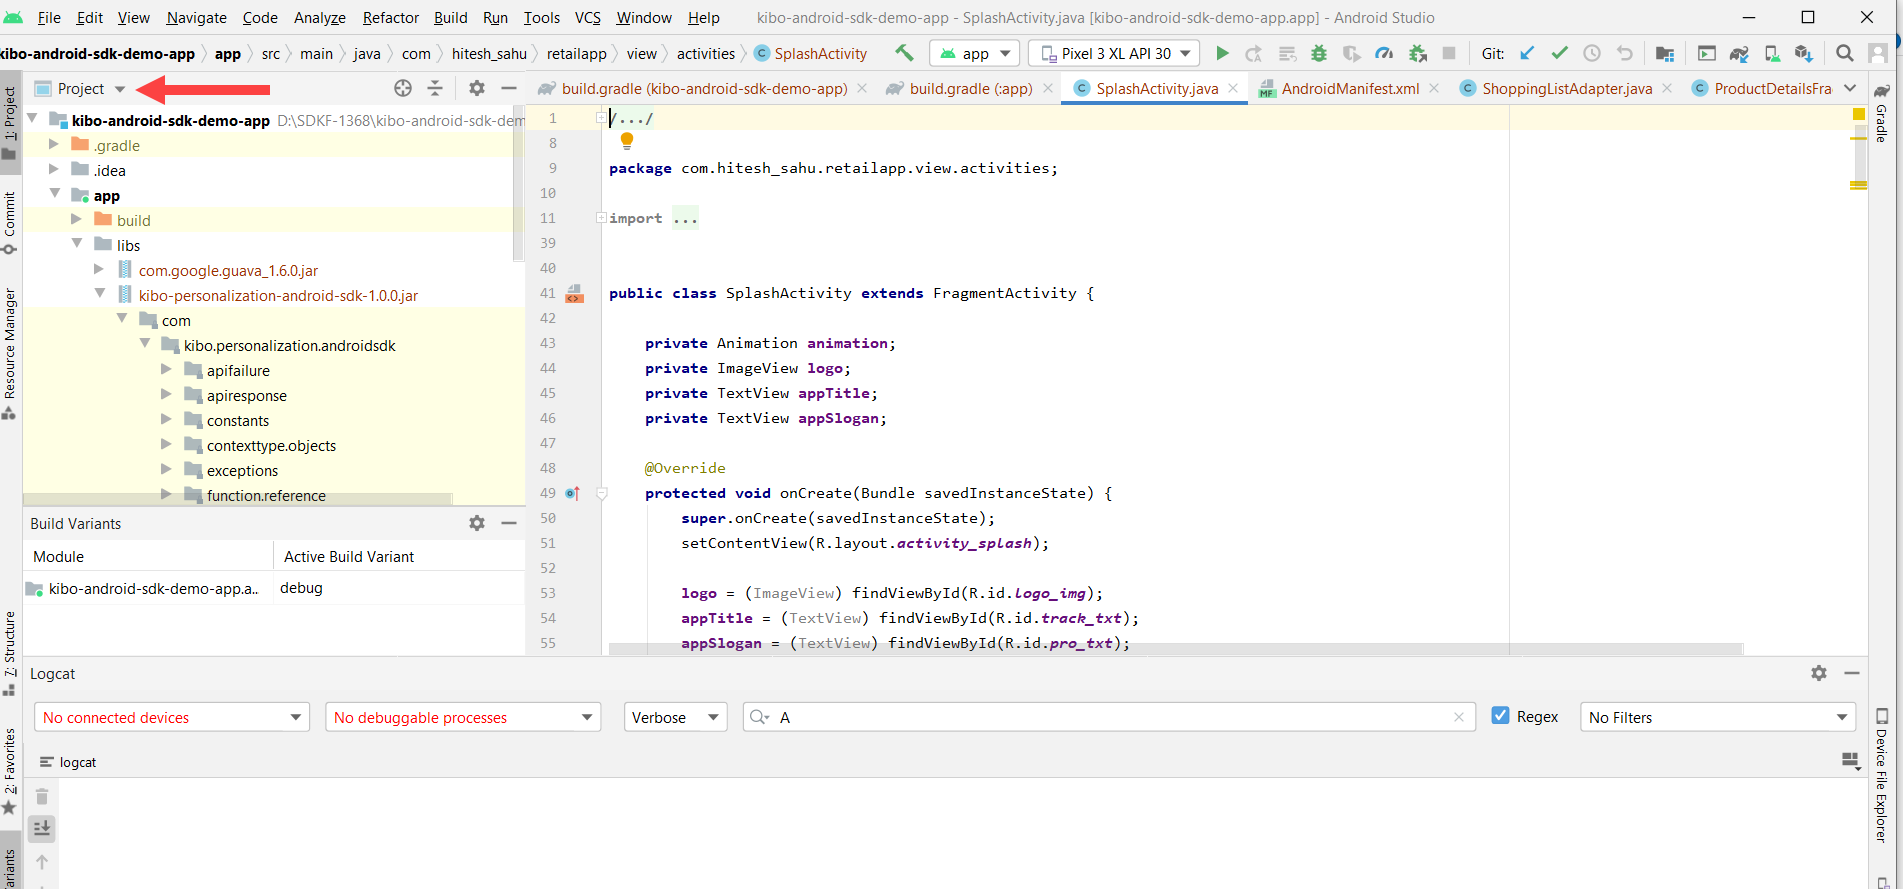 Project View in Android Studio.